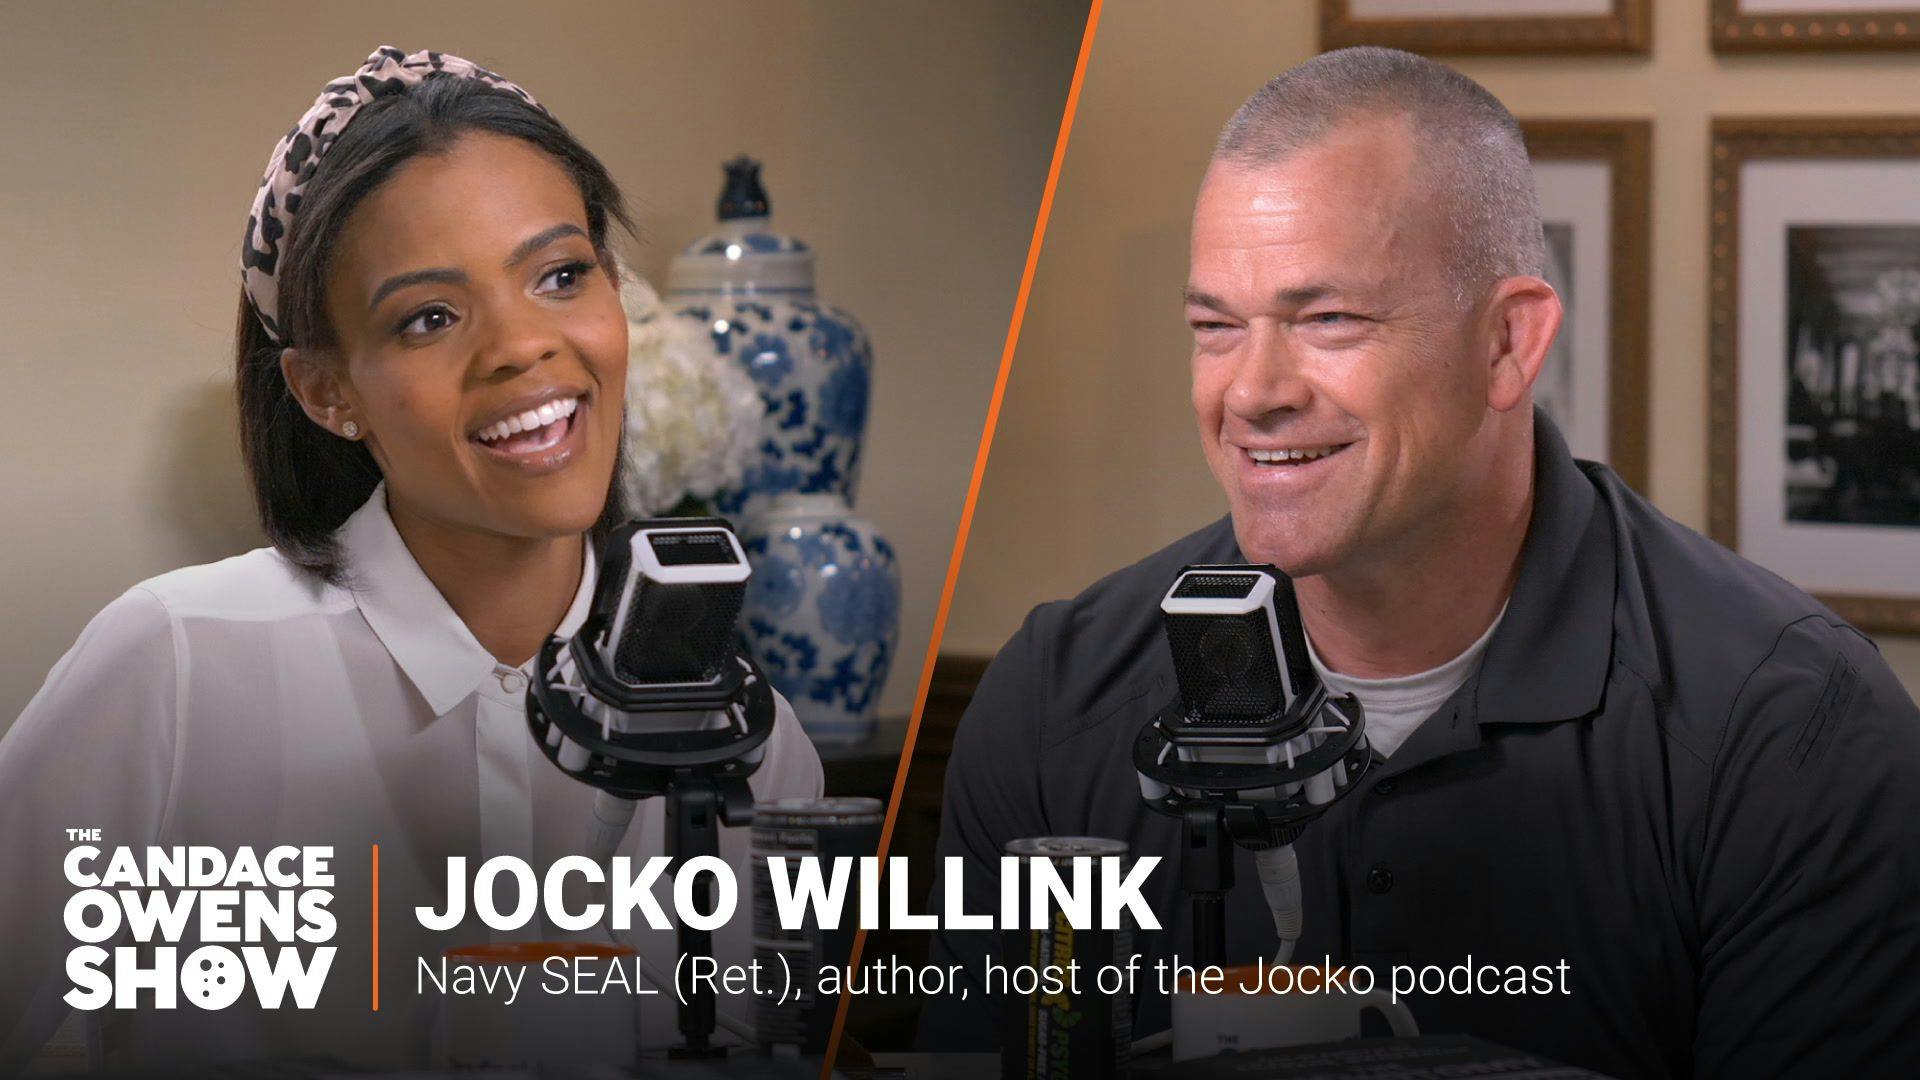 The Candace Owens Show: Jocko Willink